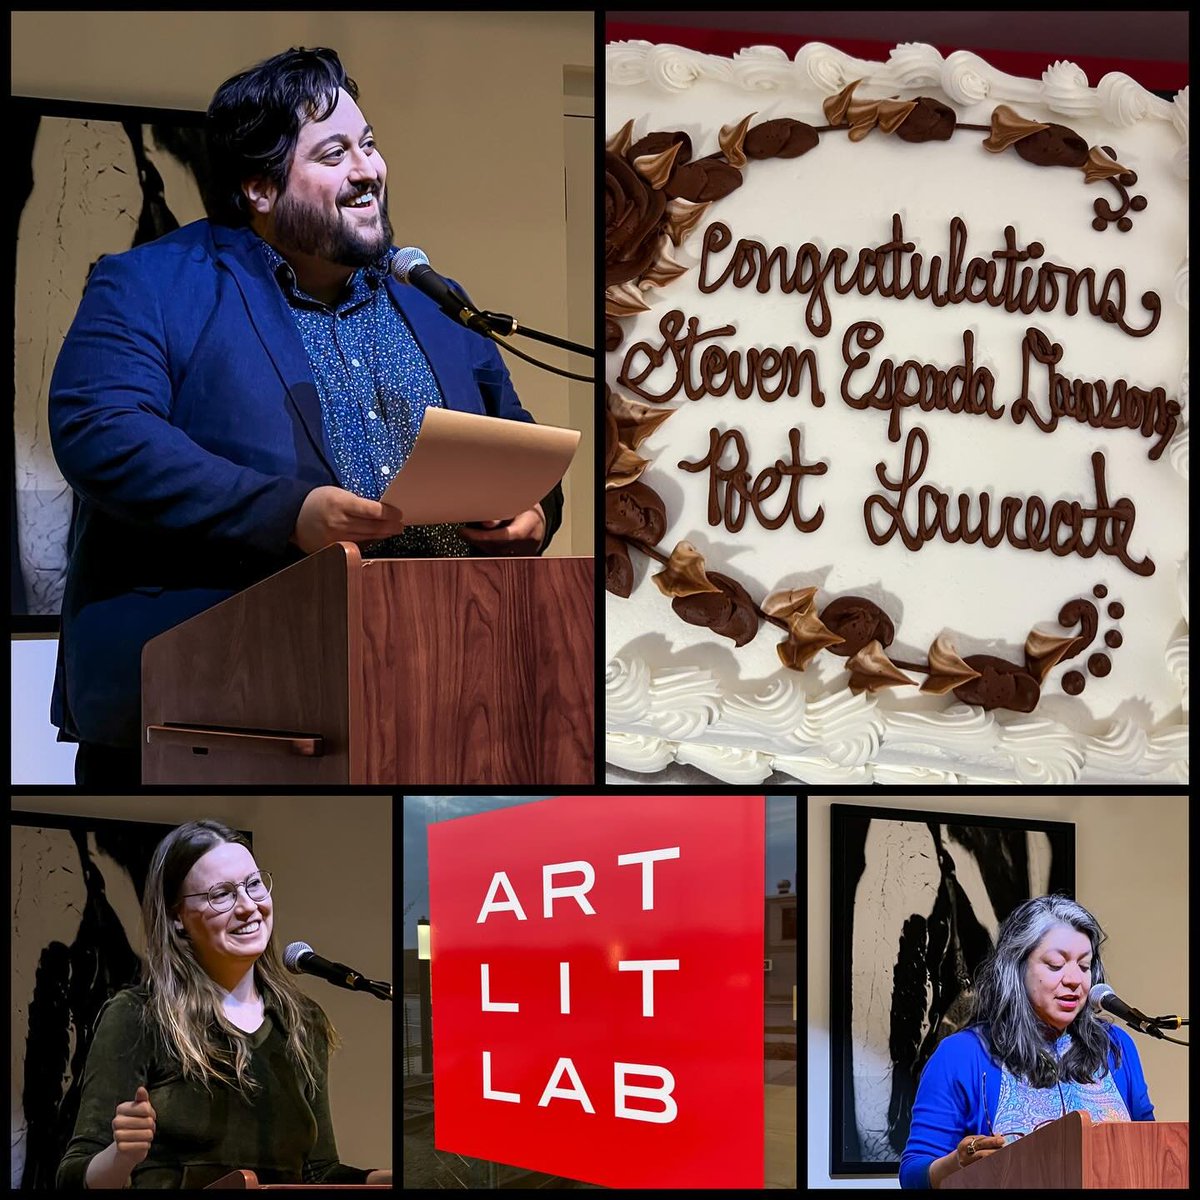 What a lovely evening at @ArtLitLab celebrating our new Poet Laureate of Madison, WI - @stevenespadaw. Congrats! Also, readings from Chessy Normile and our previous Madison Poet Laureate Angela C. Trudell Vasquez. And cake!